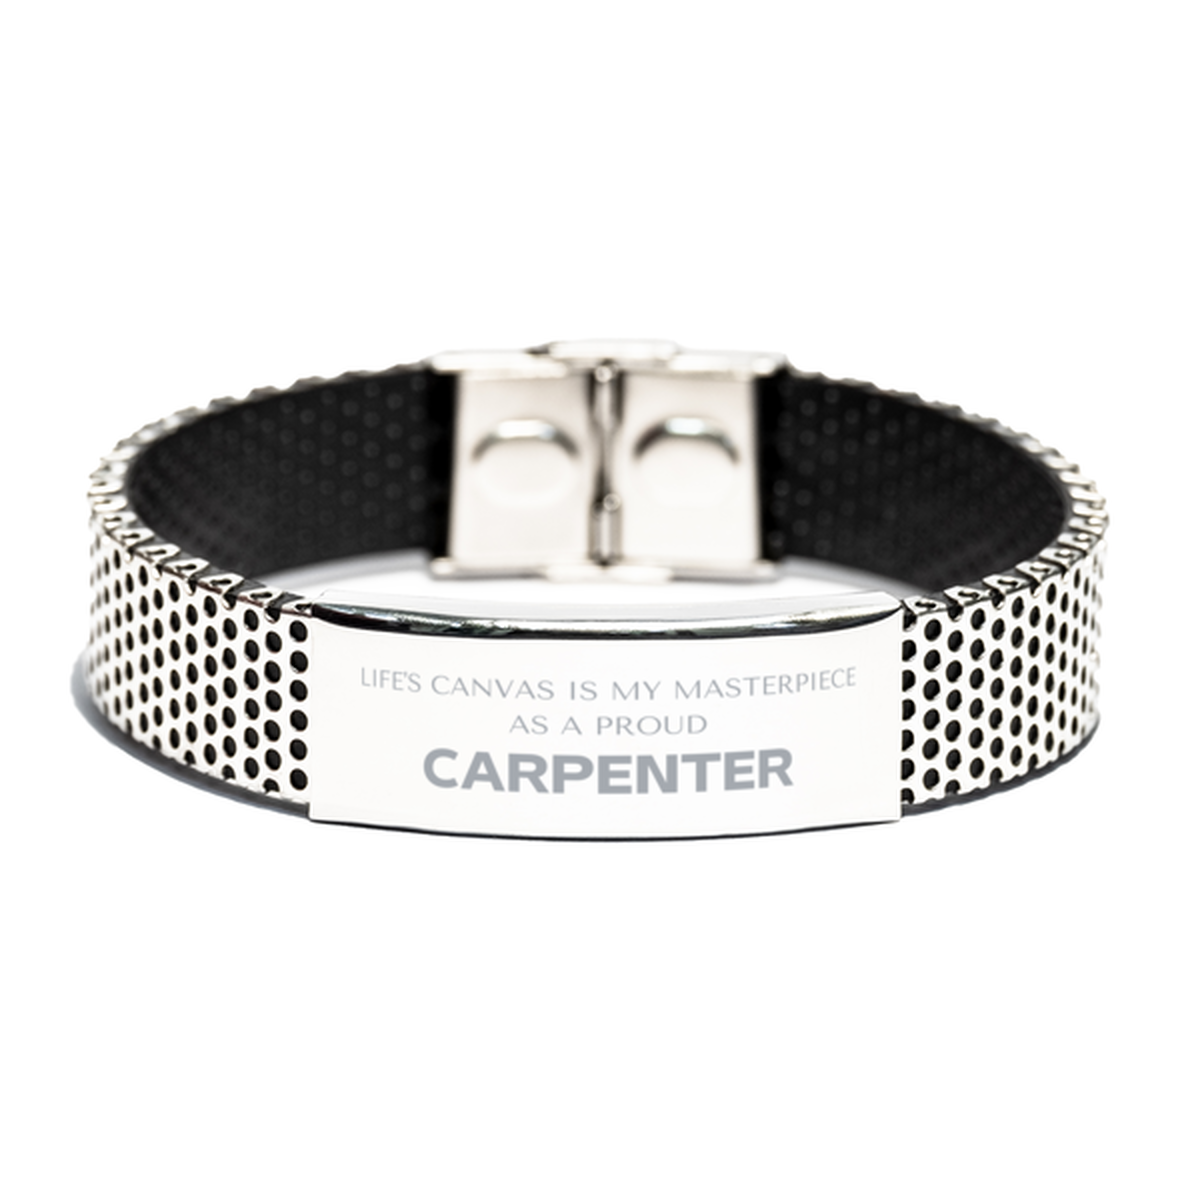 Proud Carpenter Gifts, Life's canvas is my masterpiece, Epic Birthday Christmas Unique Stainless Steel Bracelet For Carpenter, Coworkers, Men, Women, Friends